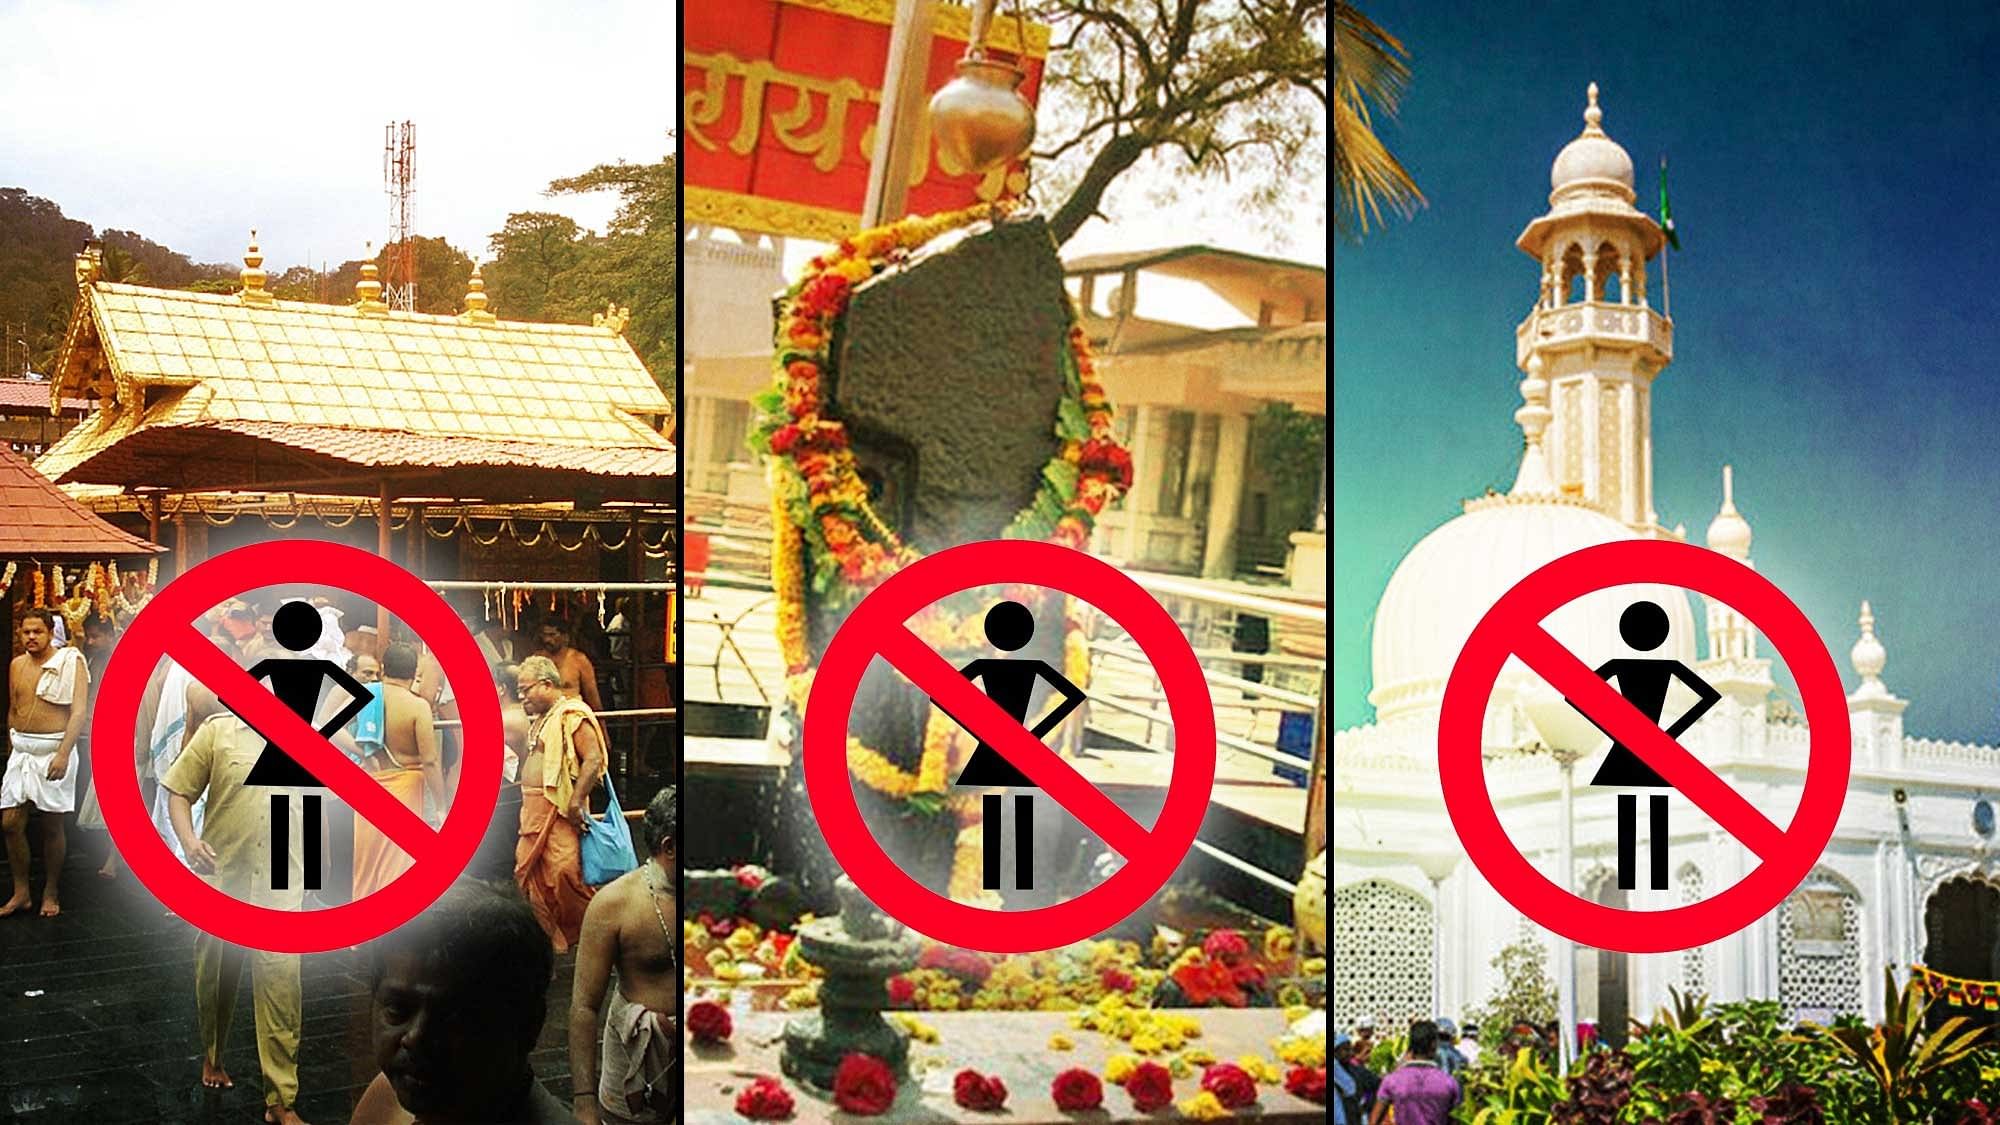 Women are banned from entering Sabarimala, Shani Temple, and the Haji Ali dargah. (Photo: The Quint)